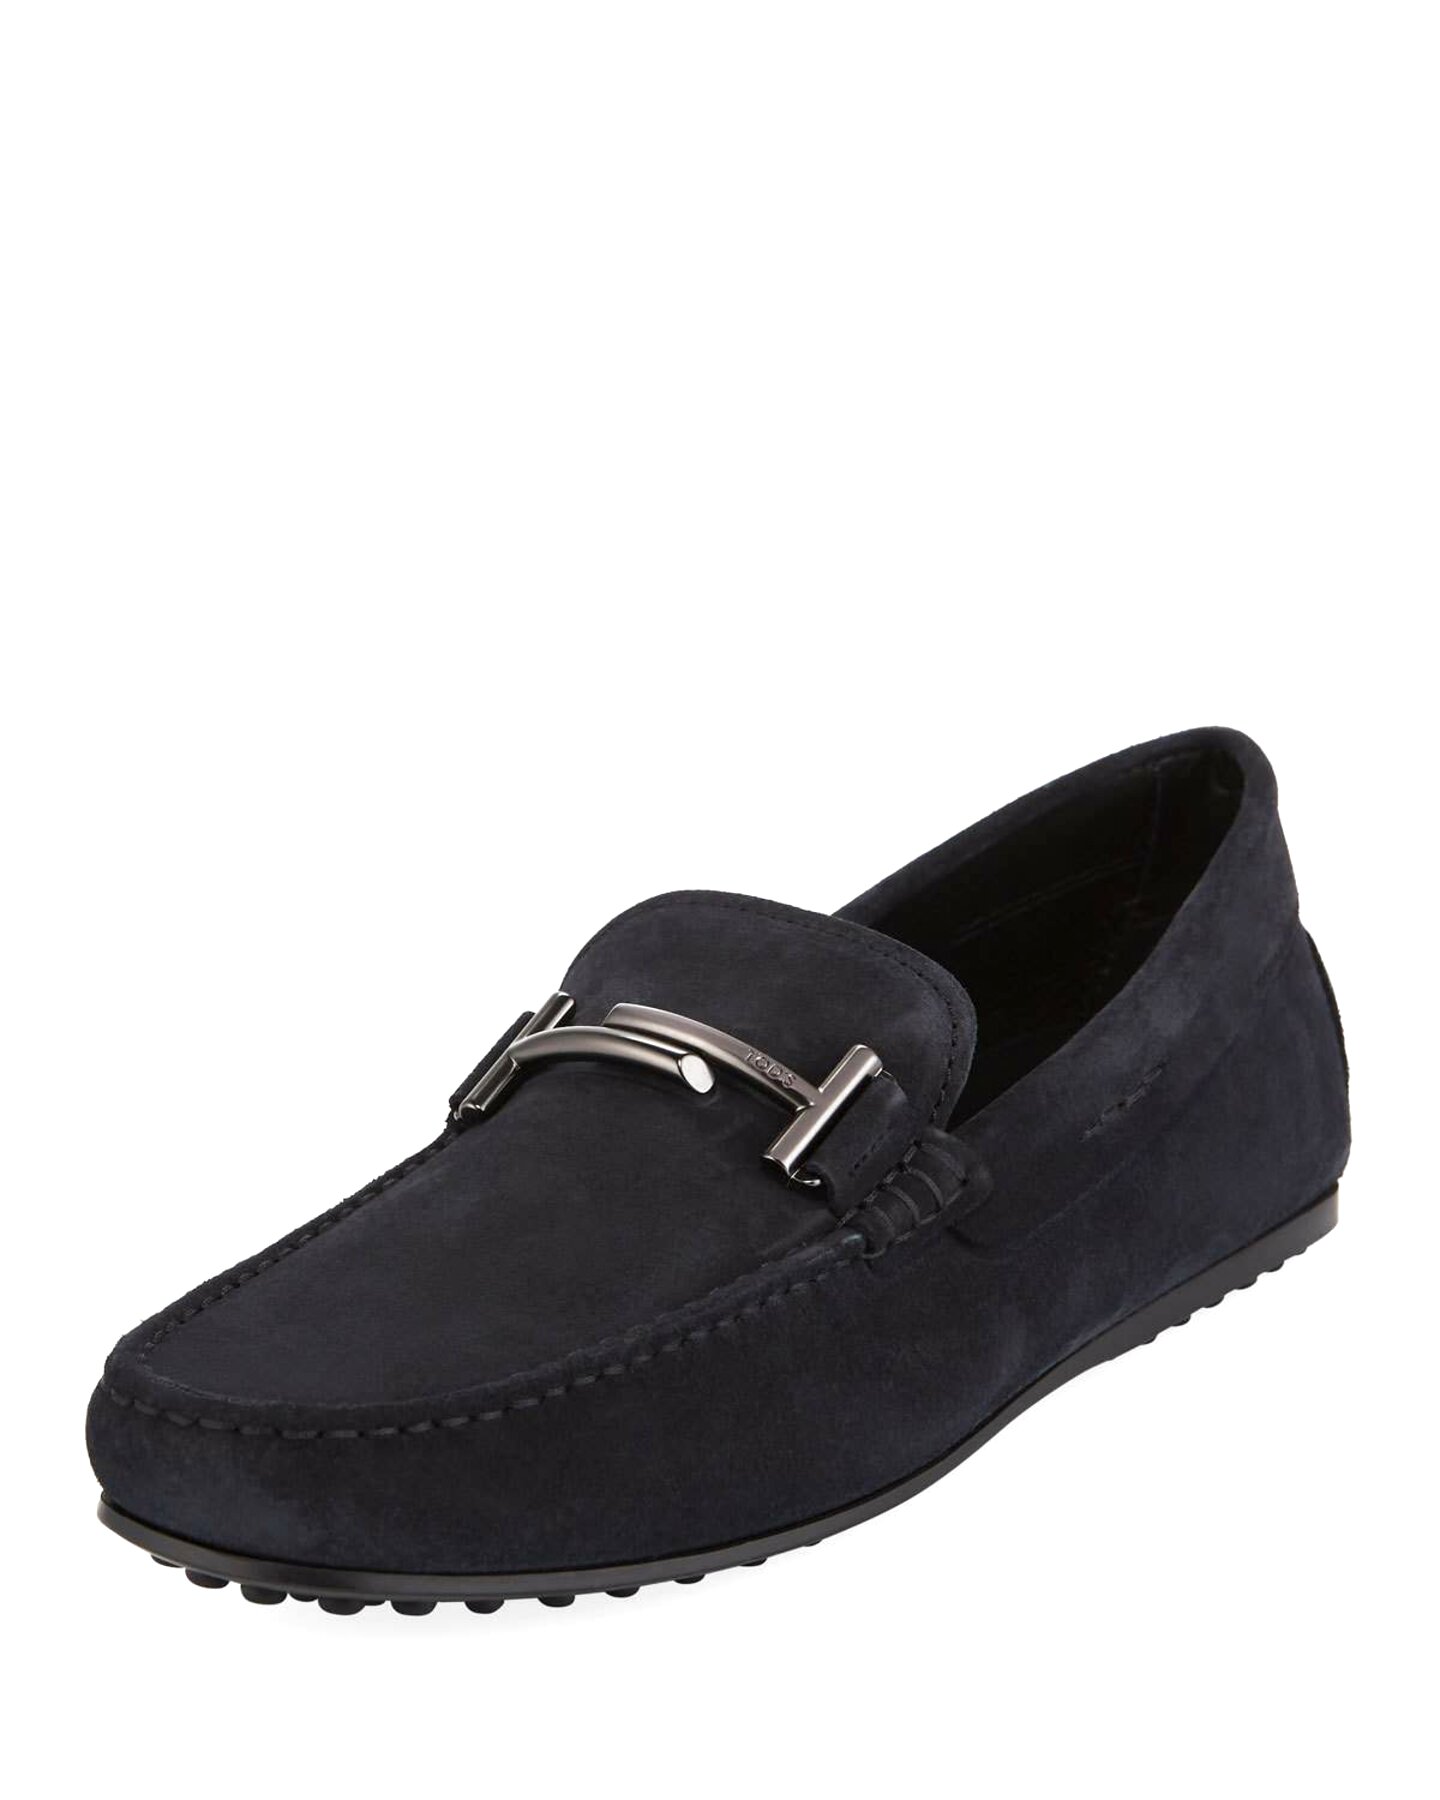 Mens Tods Loafers for sale in UK | 57 used Mens Tods Loafers